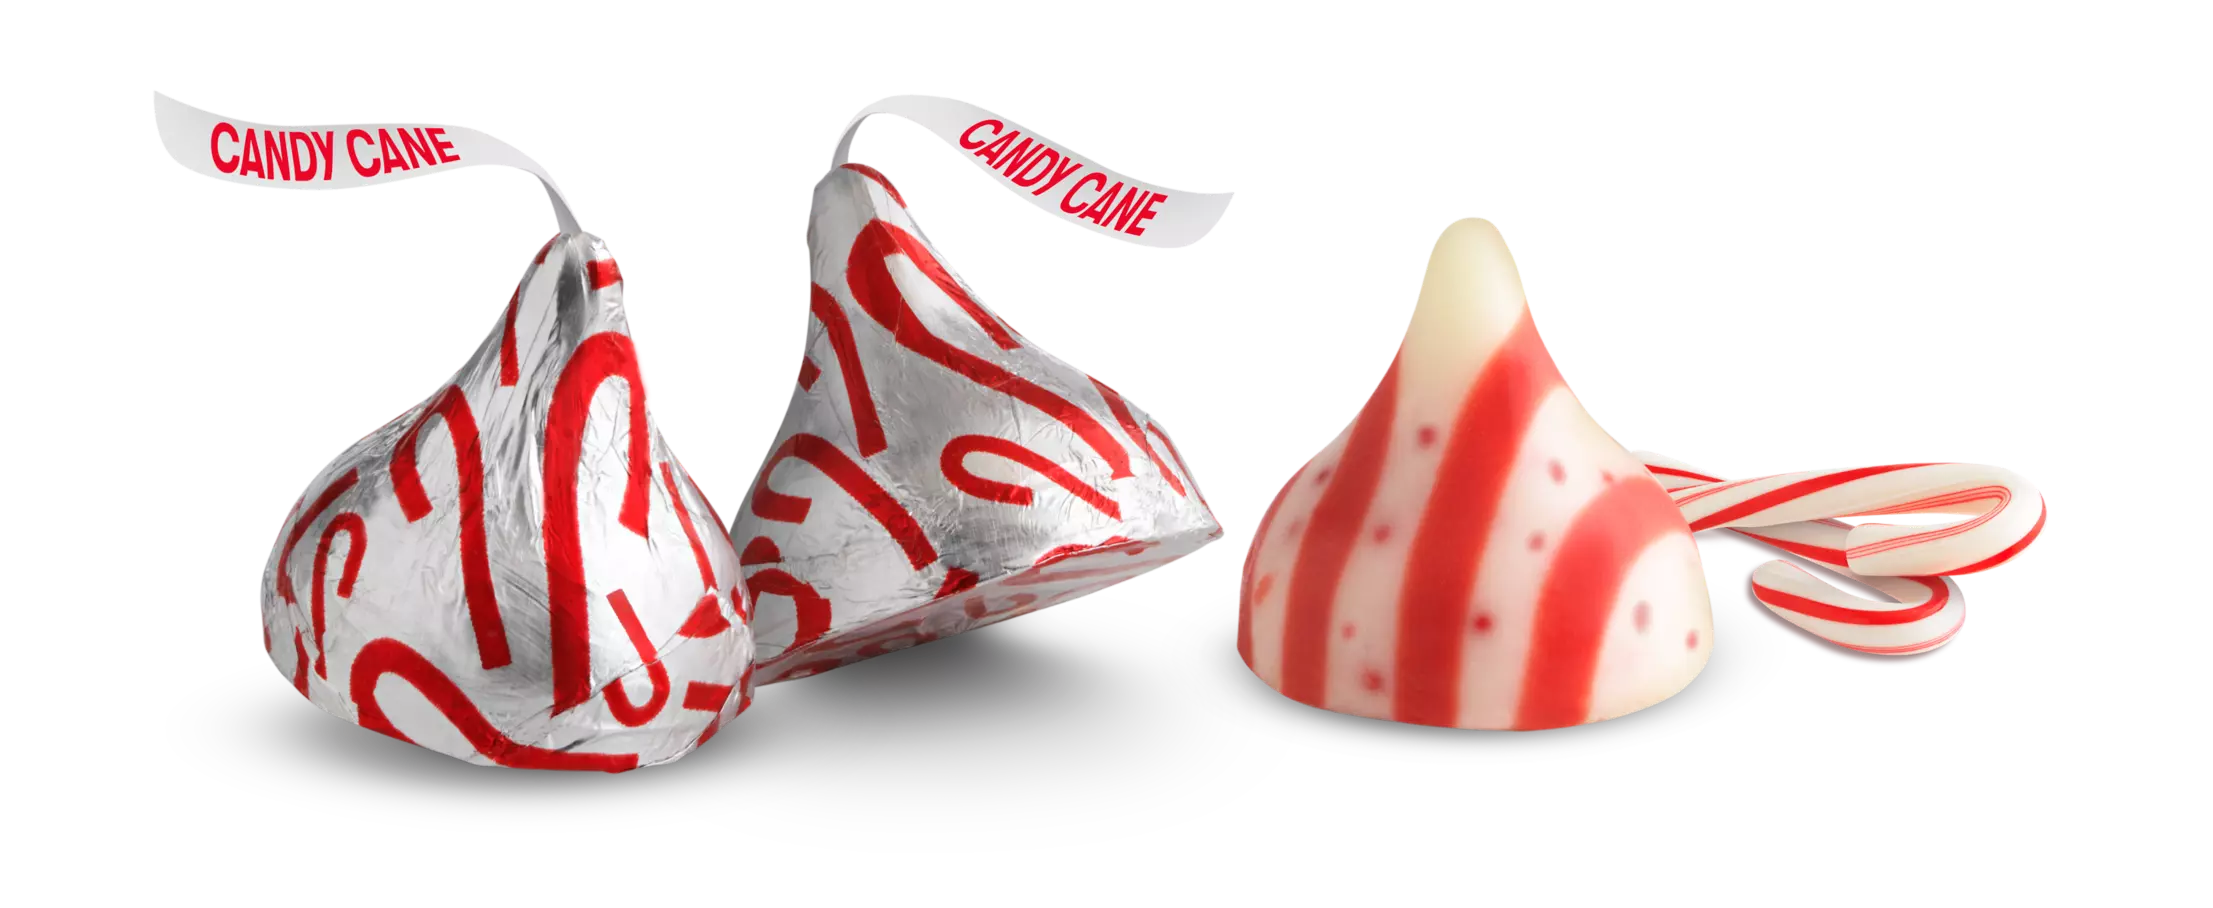 HERSHEY'S KISSES Candy Cane Mint Candy, 9 oz bag - Out of Package